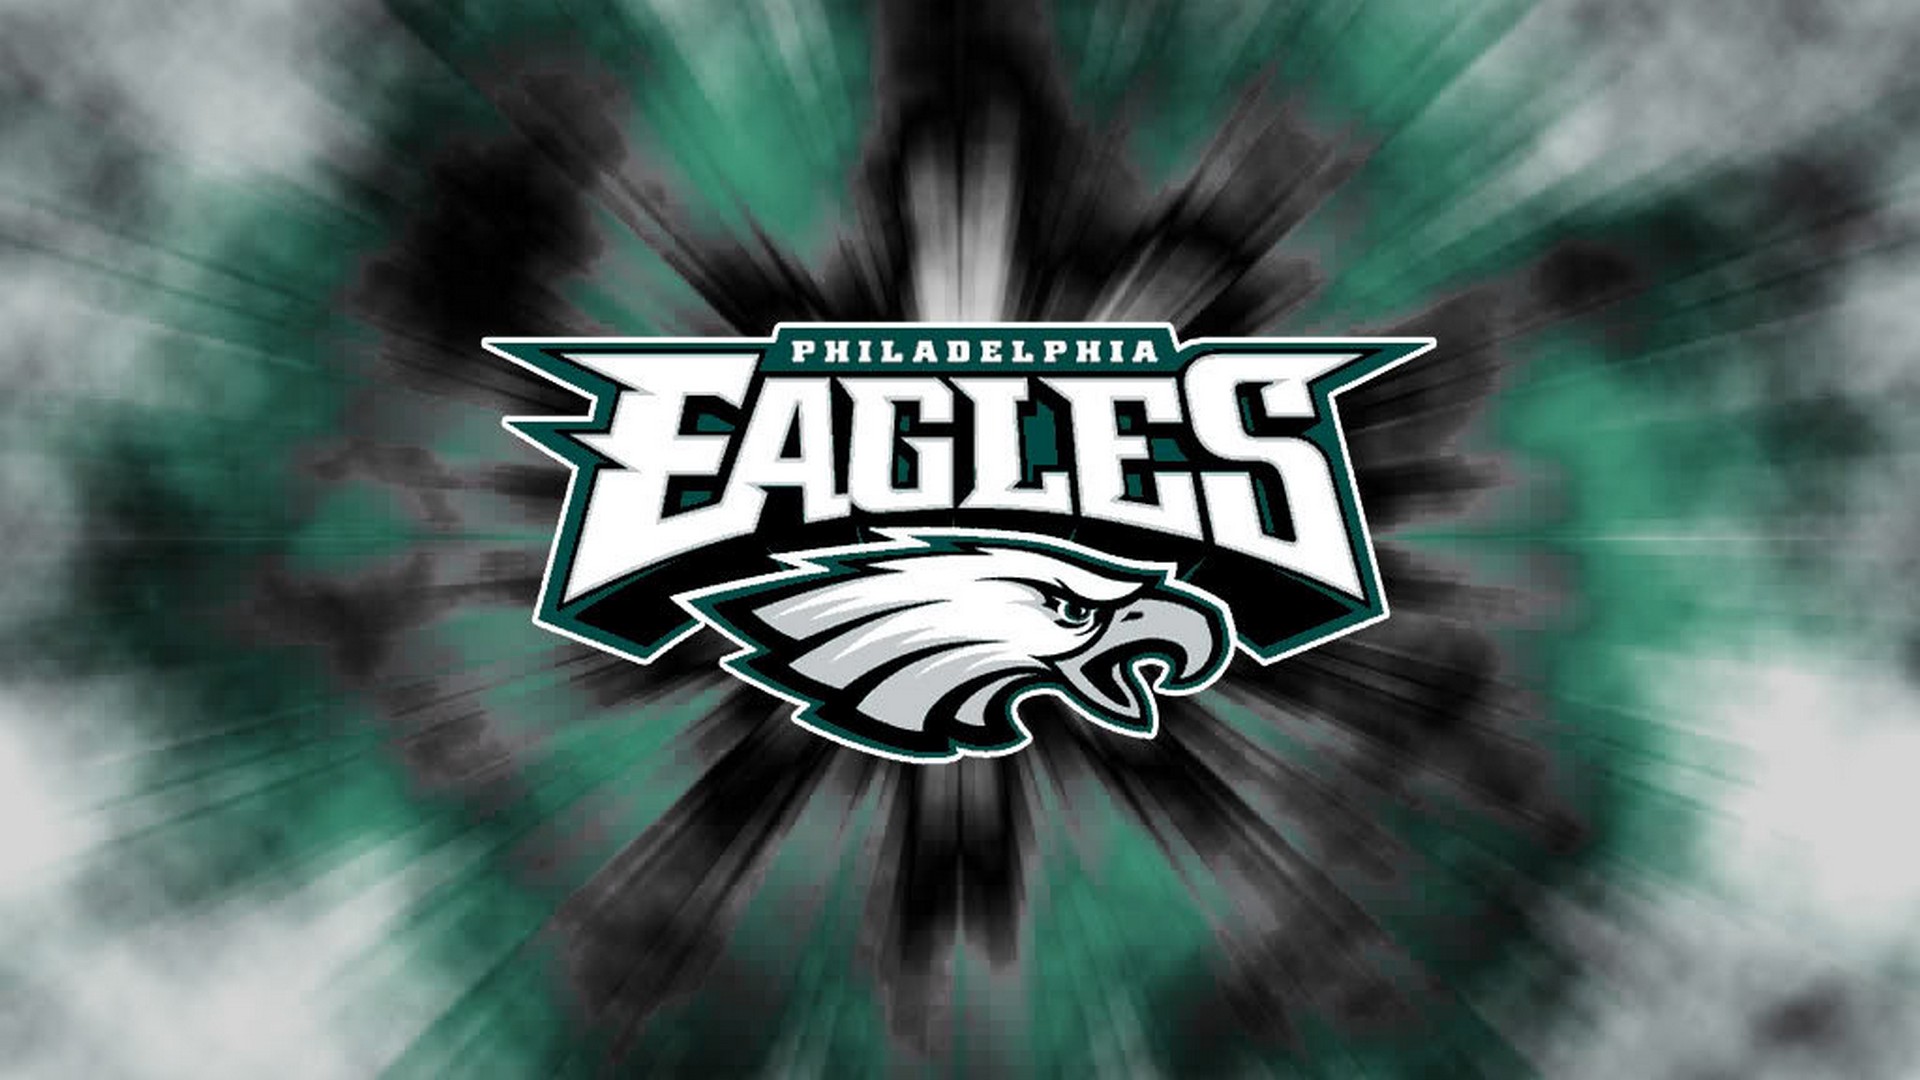 Backgrounds Phila Eagles HD With Resolution 1920X1080 pixel. You can make this wallpaper for your Mac or Windows Desktop Background, iPhone, Android or Tablet and another Smartphone device for free